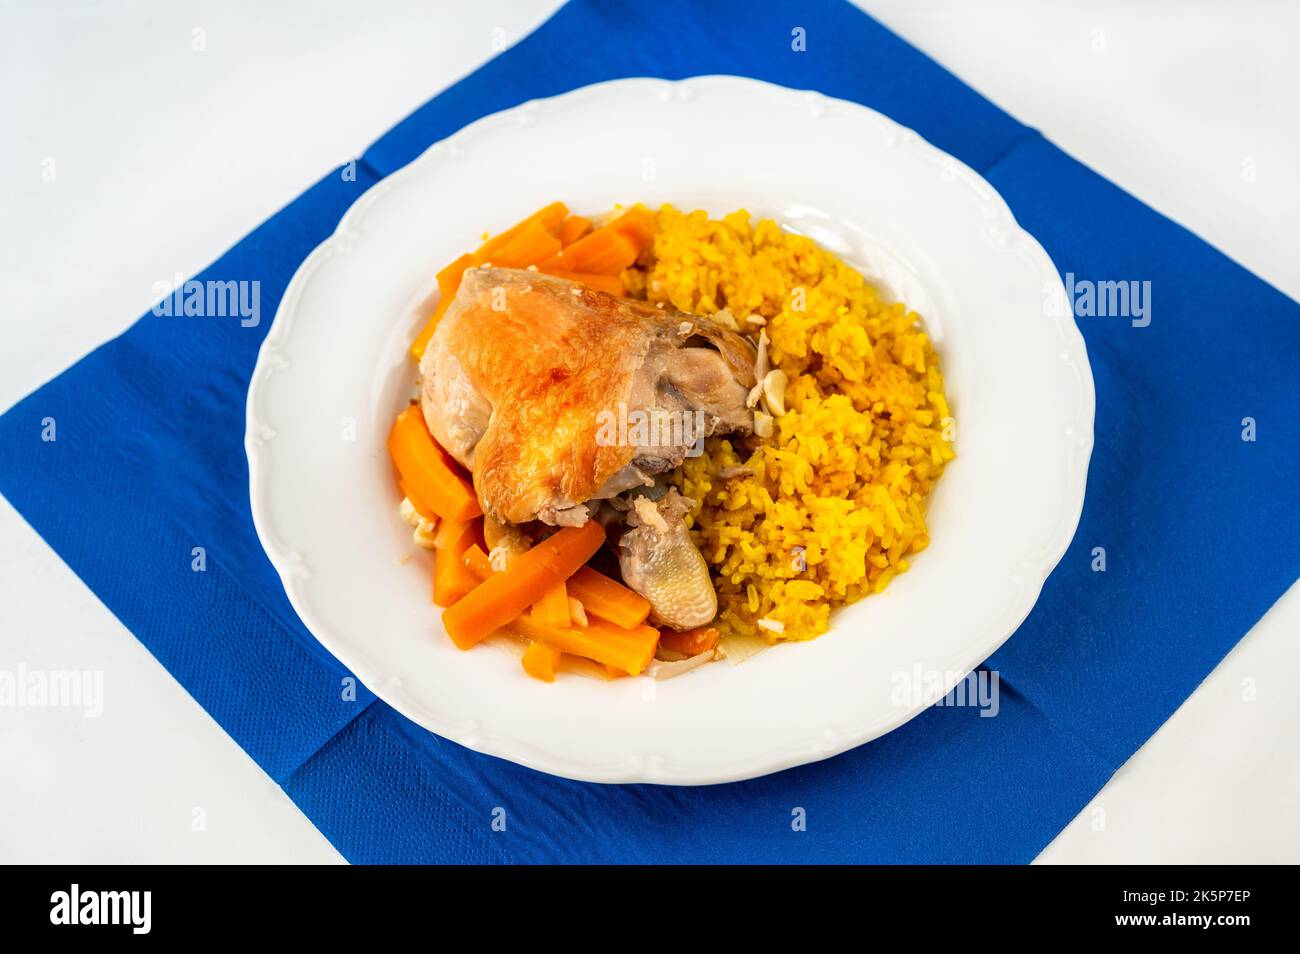 Baked chicken quarter, roasted carrot and stewed turmeric and saffron rice on white plate, blue towel on white table, closeup. Stock Photo